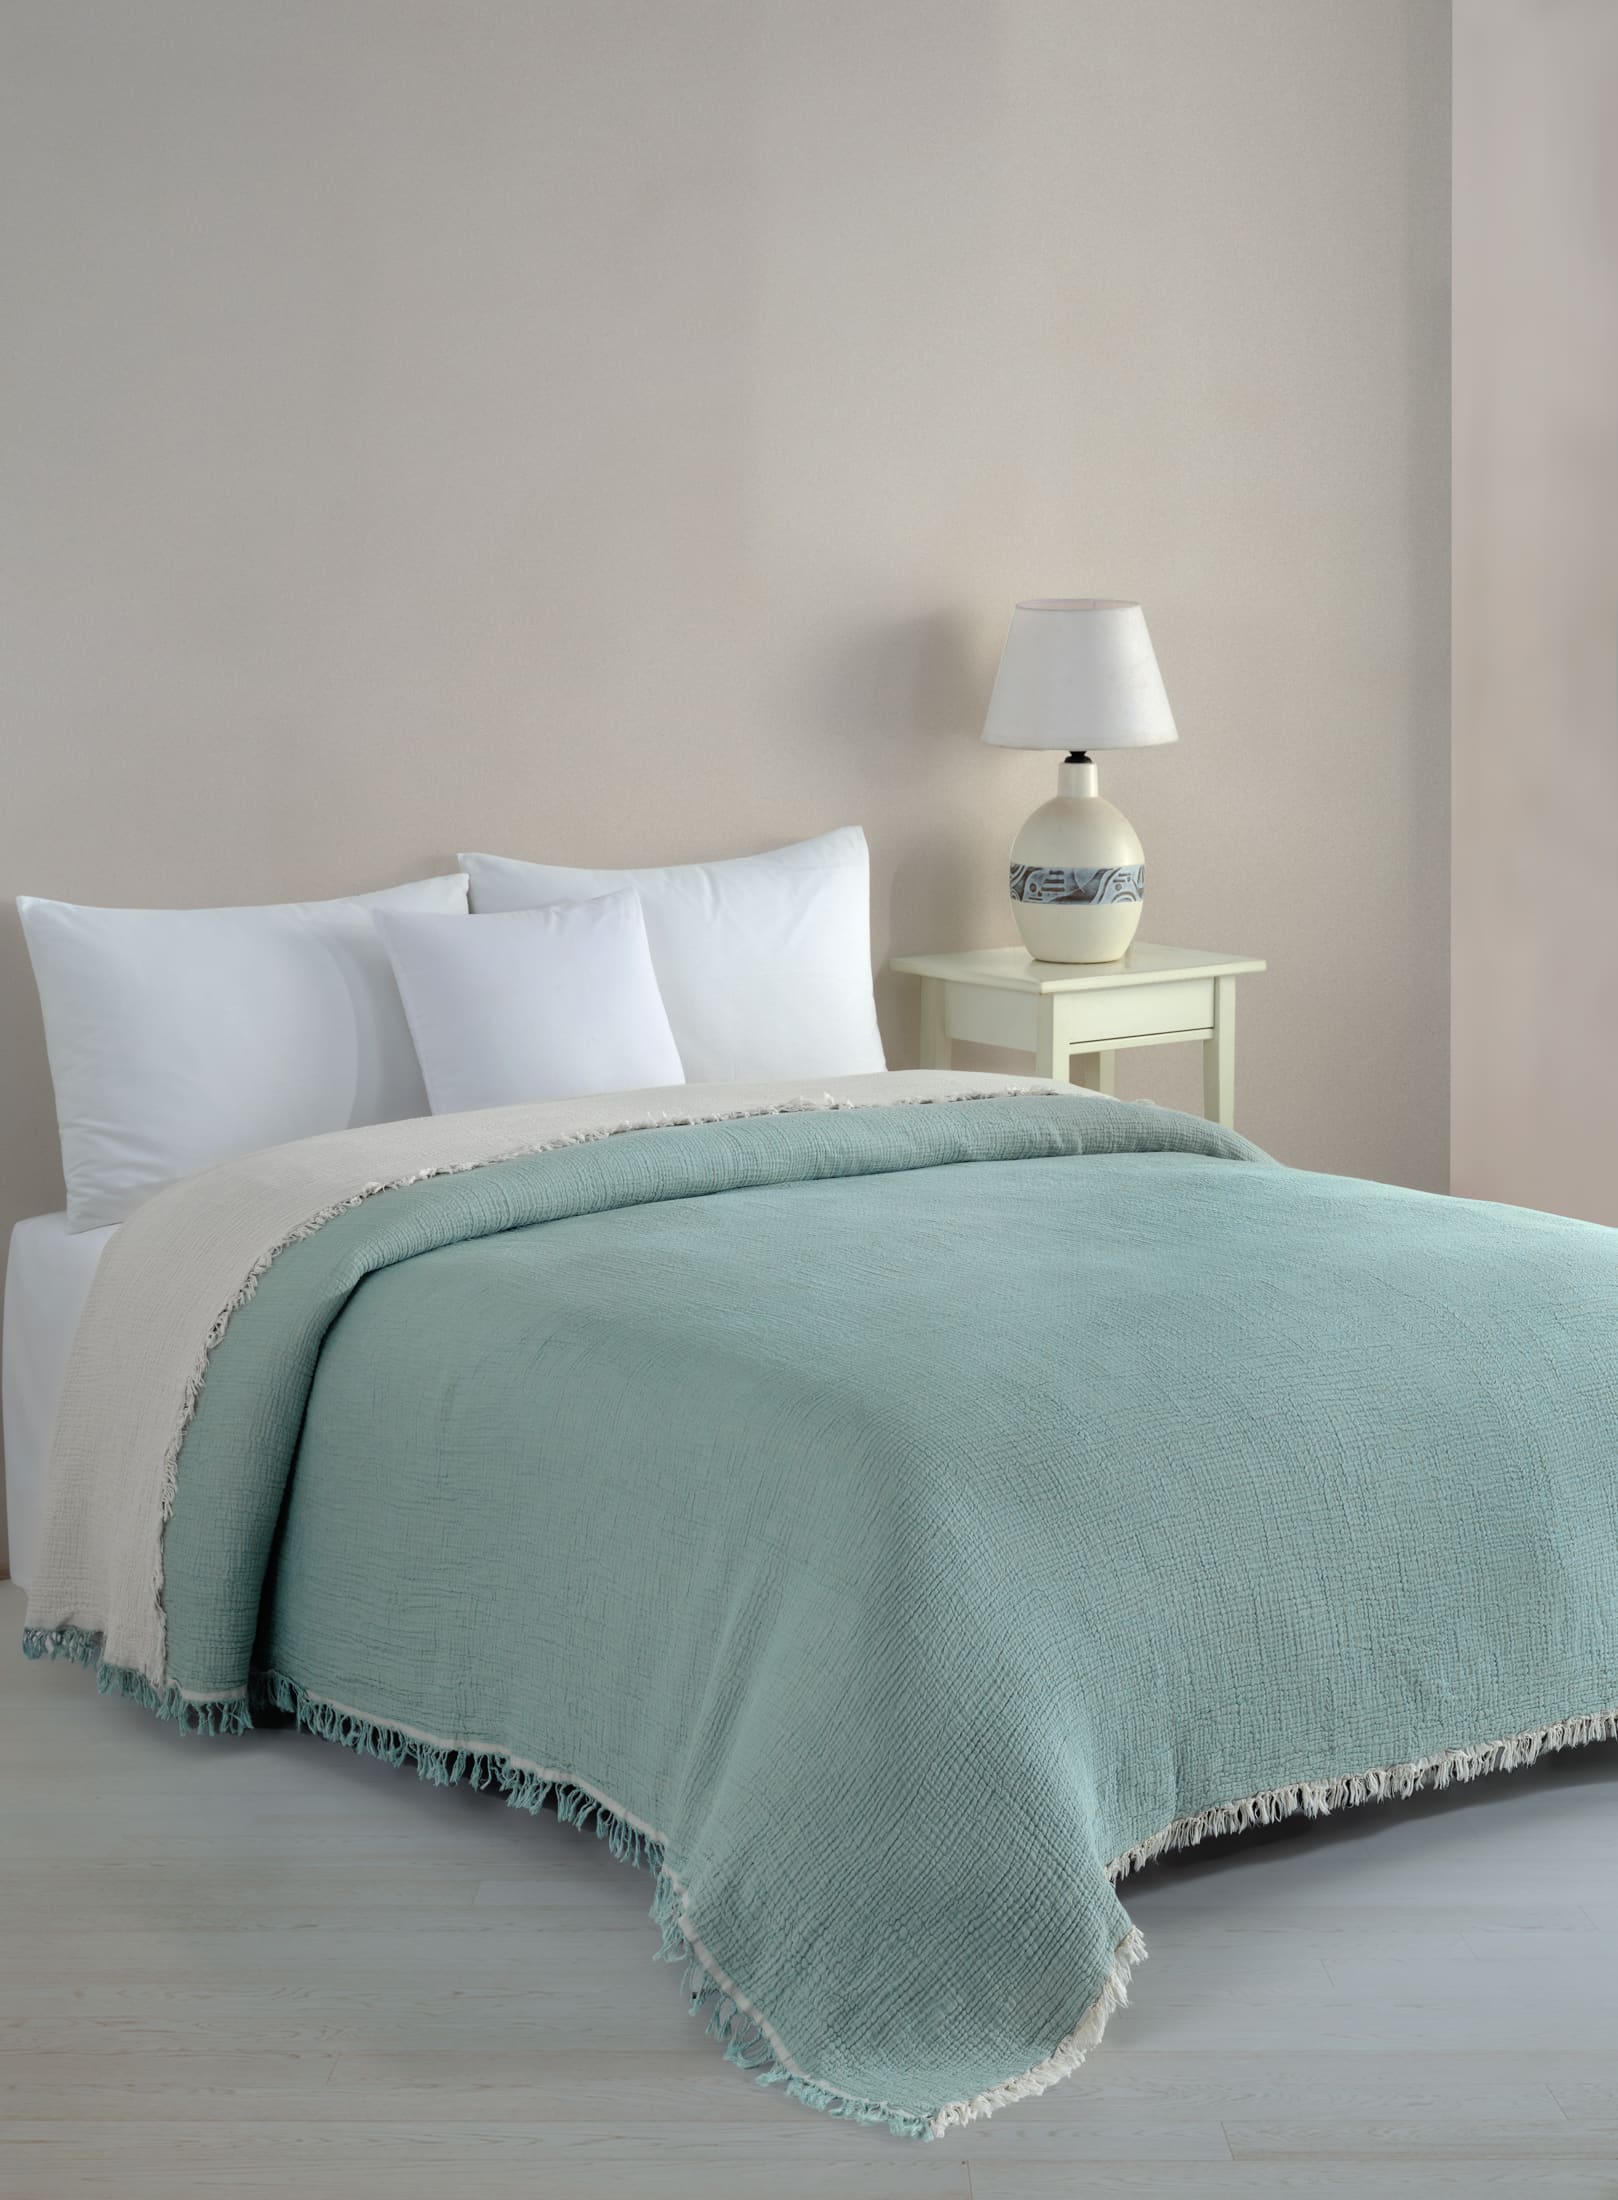 Begonville Bedspread Cloudy 4-Ply Cotton Blanket - Mint